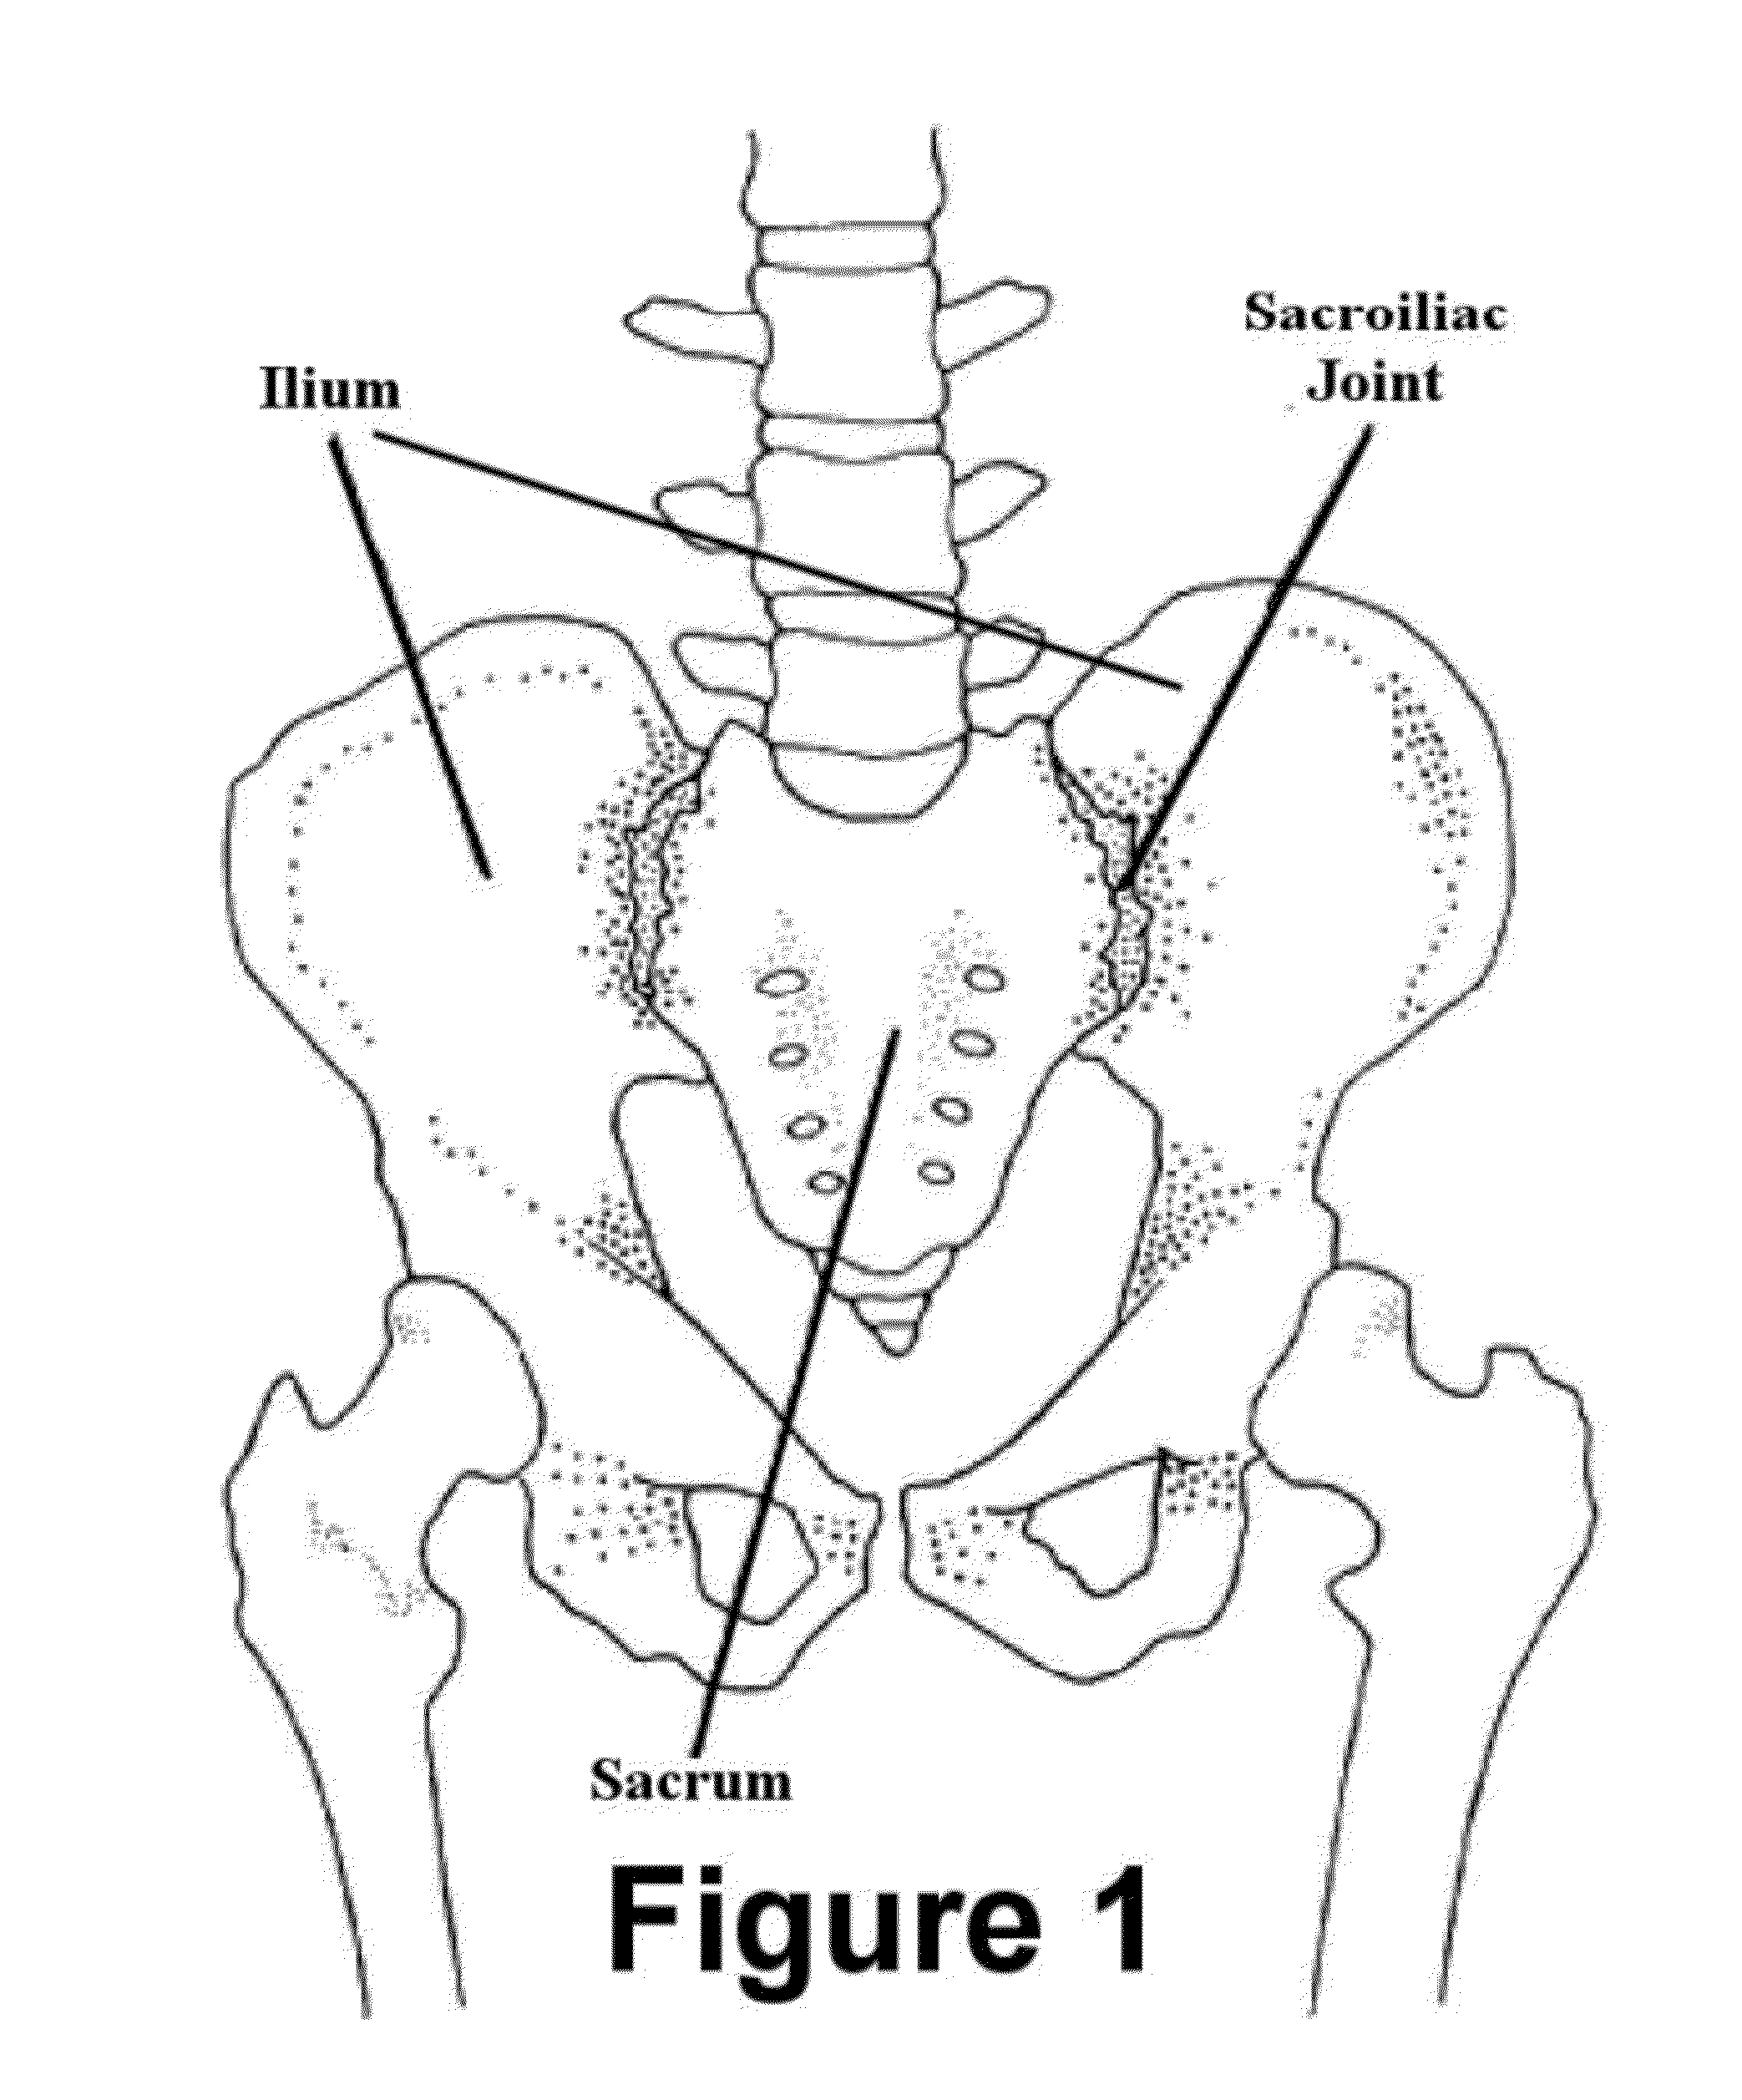 Method for Minimally Invasive Treatment of Unstable Pelvic Ring Injuries